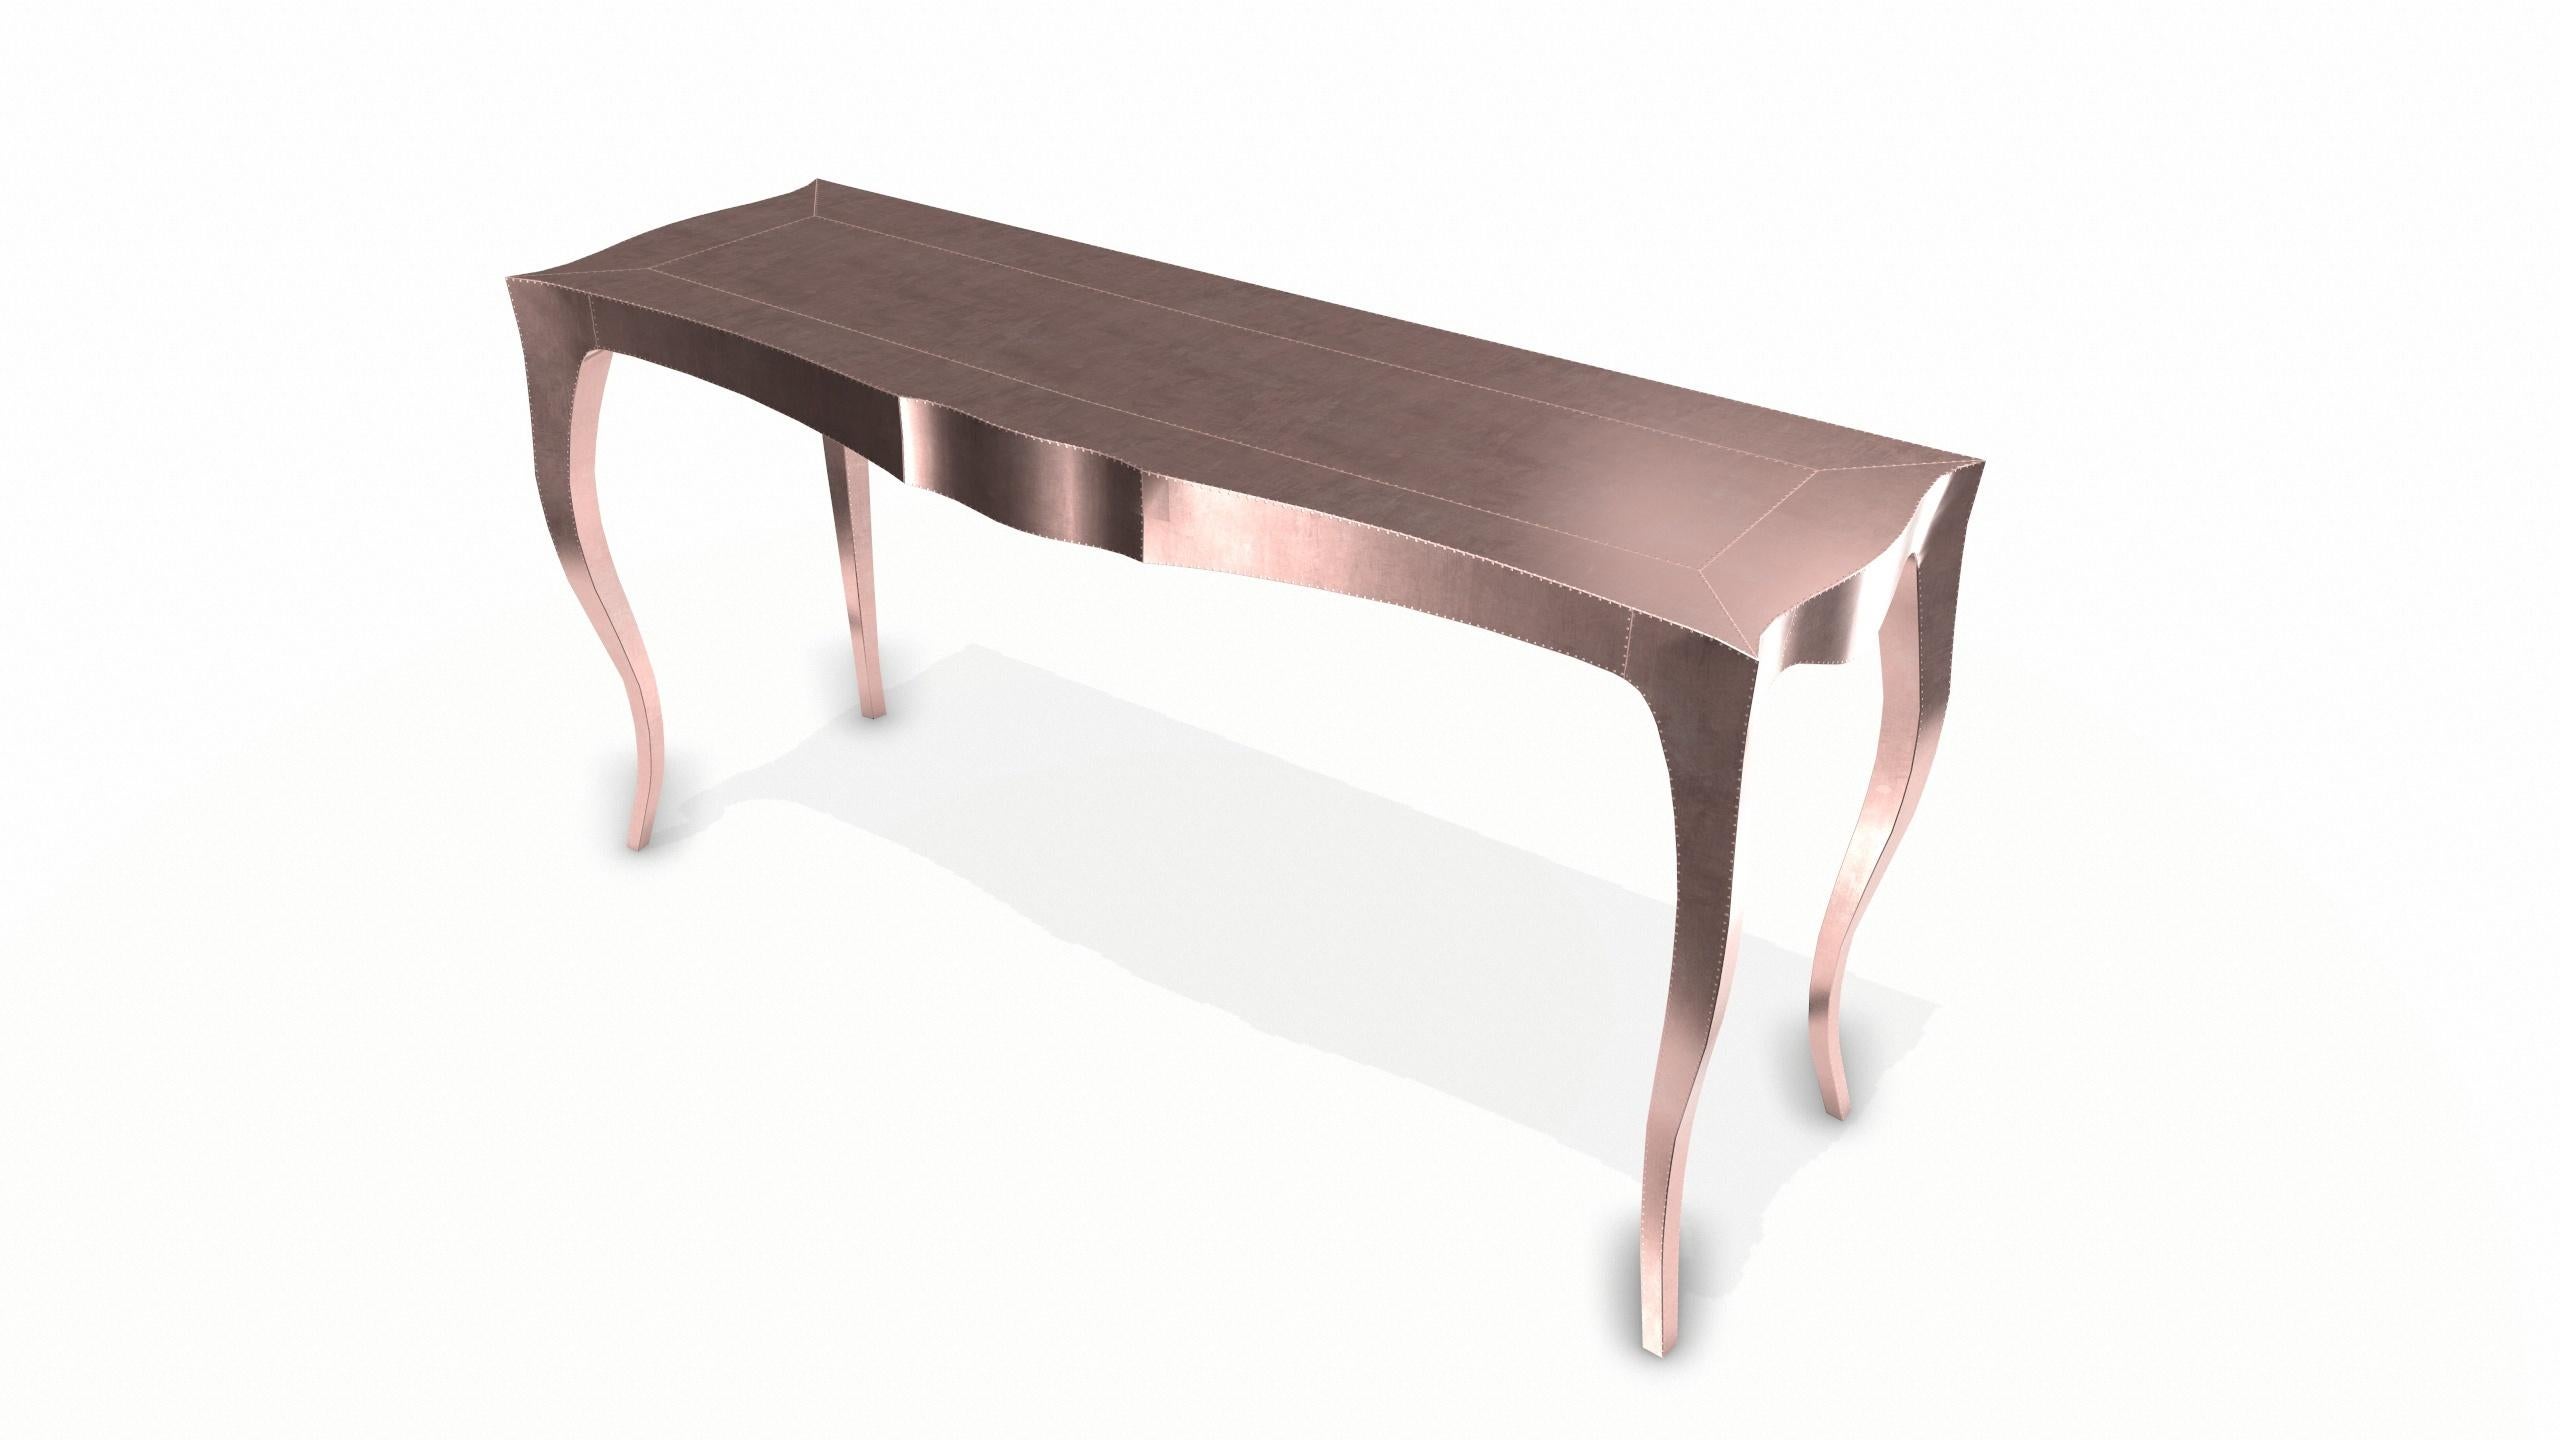 Other Louise Console Art Nouveau Tray Tables Smooth Copper by Paul Mathieu For Sale